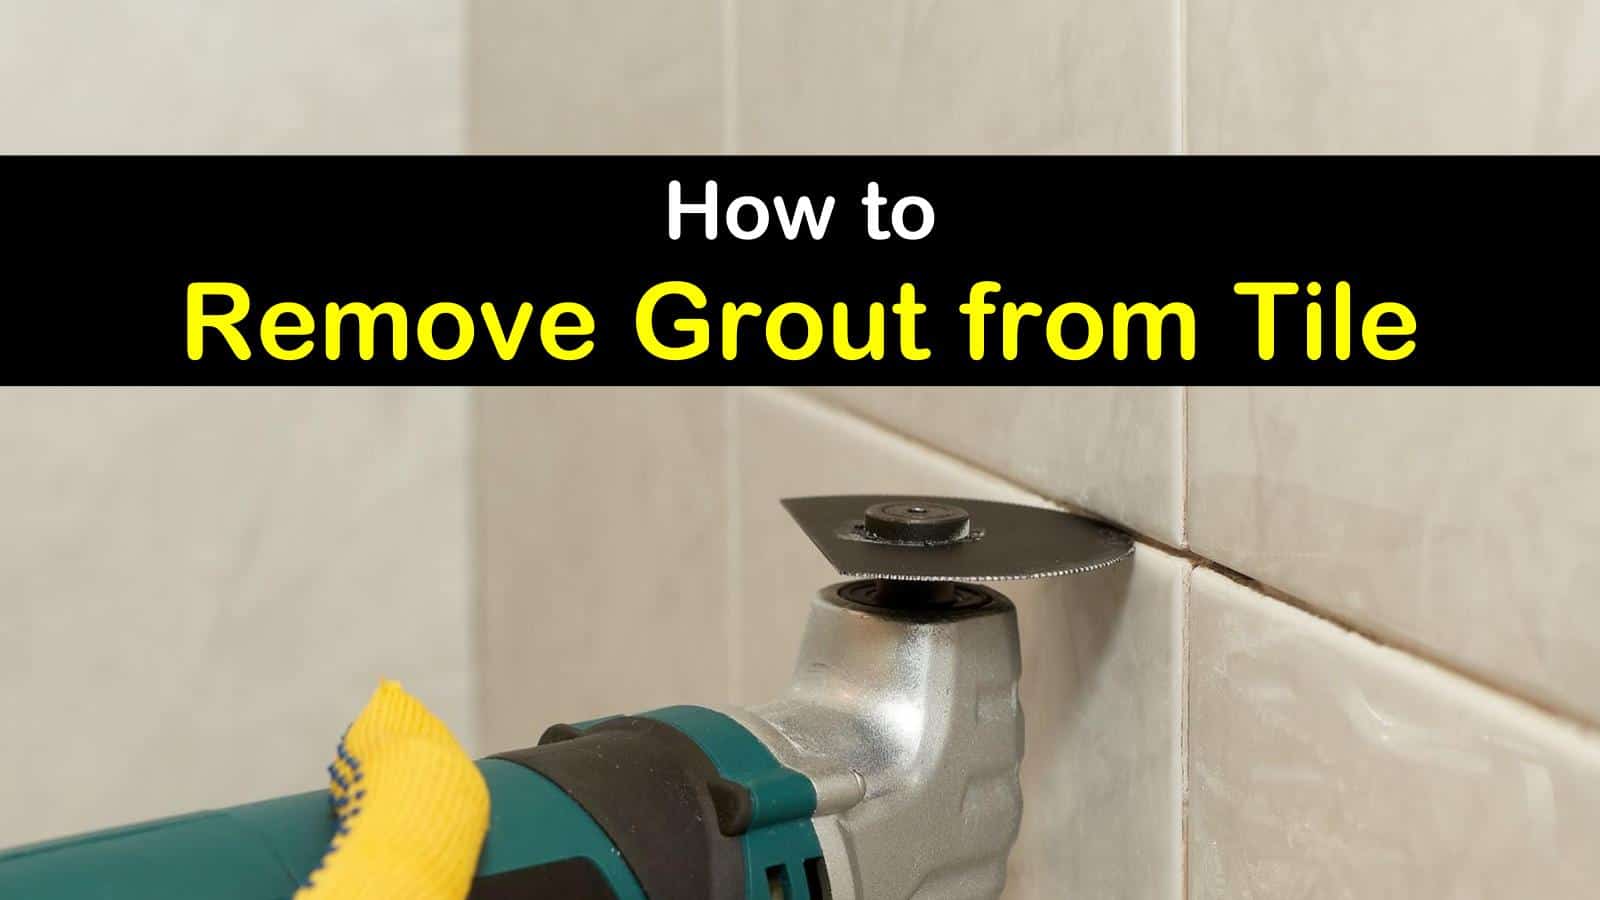 8 Crafty Ways To Remove Grout From Tile, How To Clean Grout Off Tile That Dried